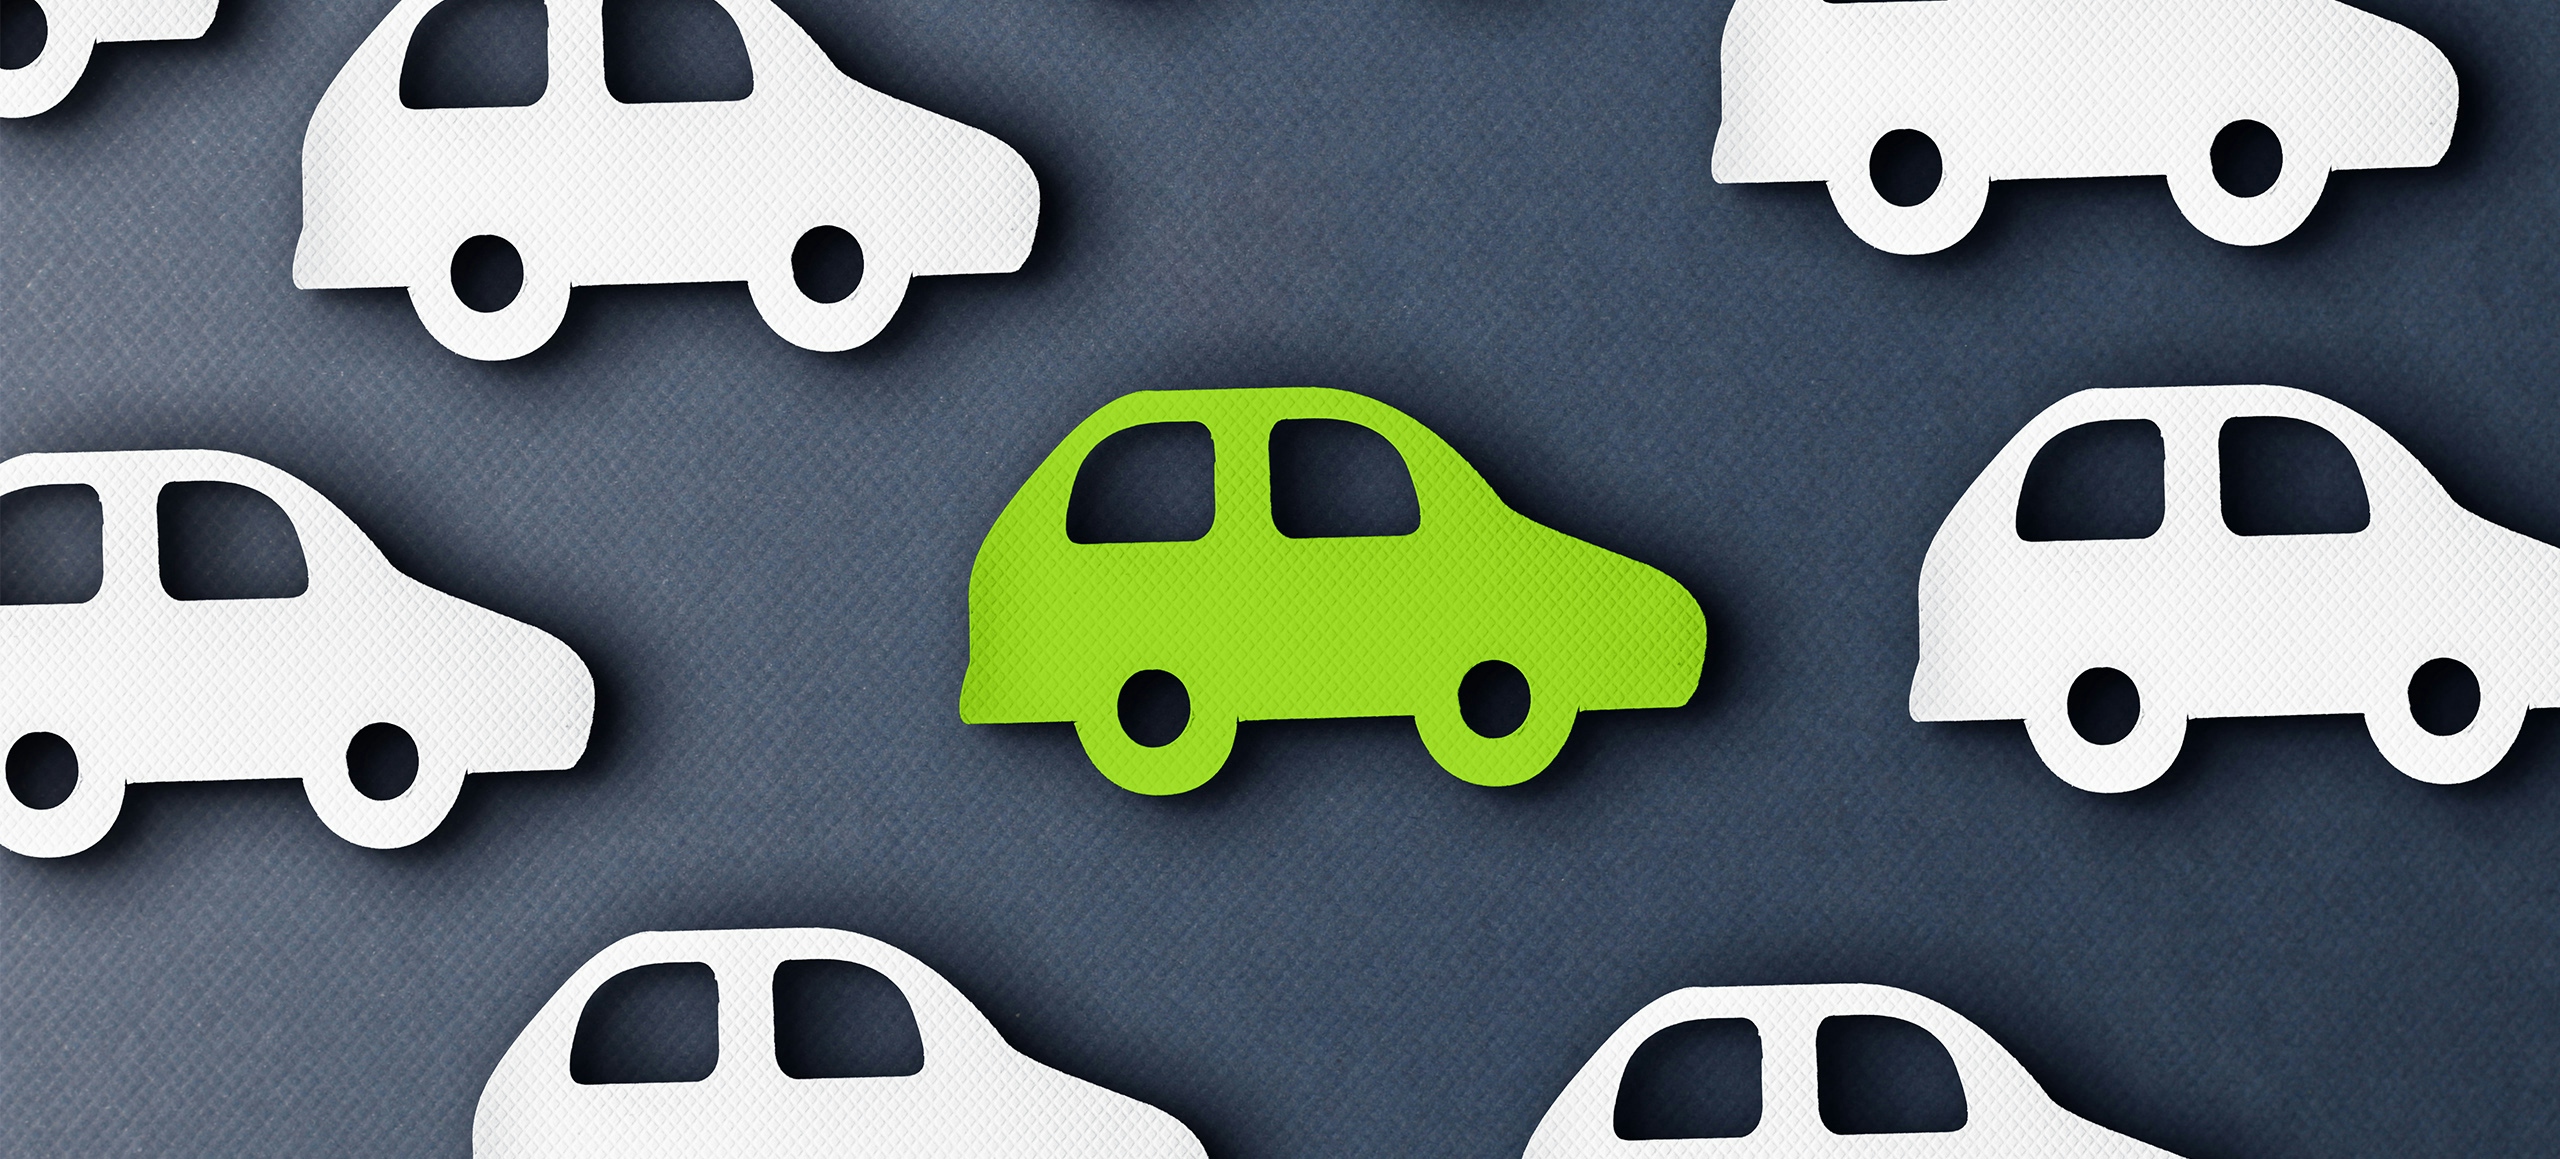 Colorado State Electric Vehicle Tax Credit